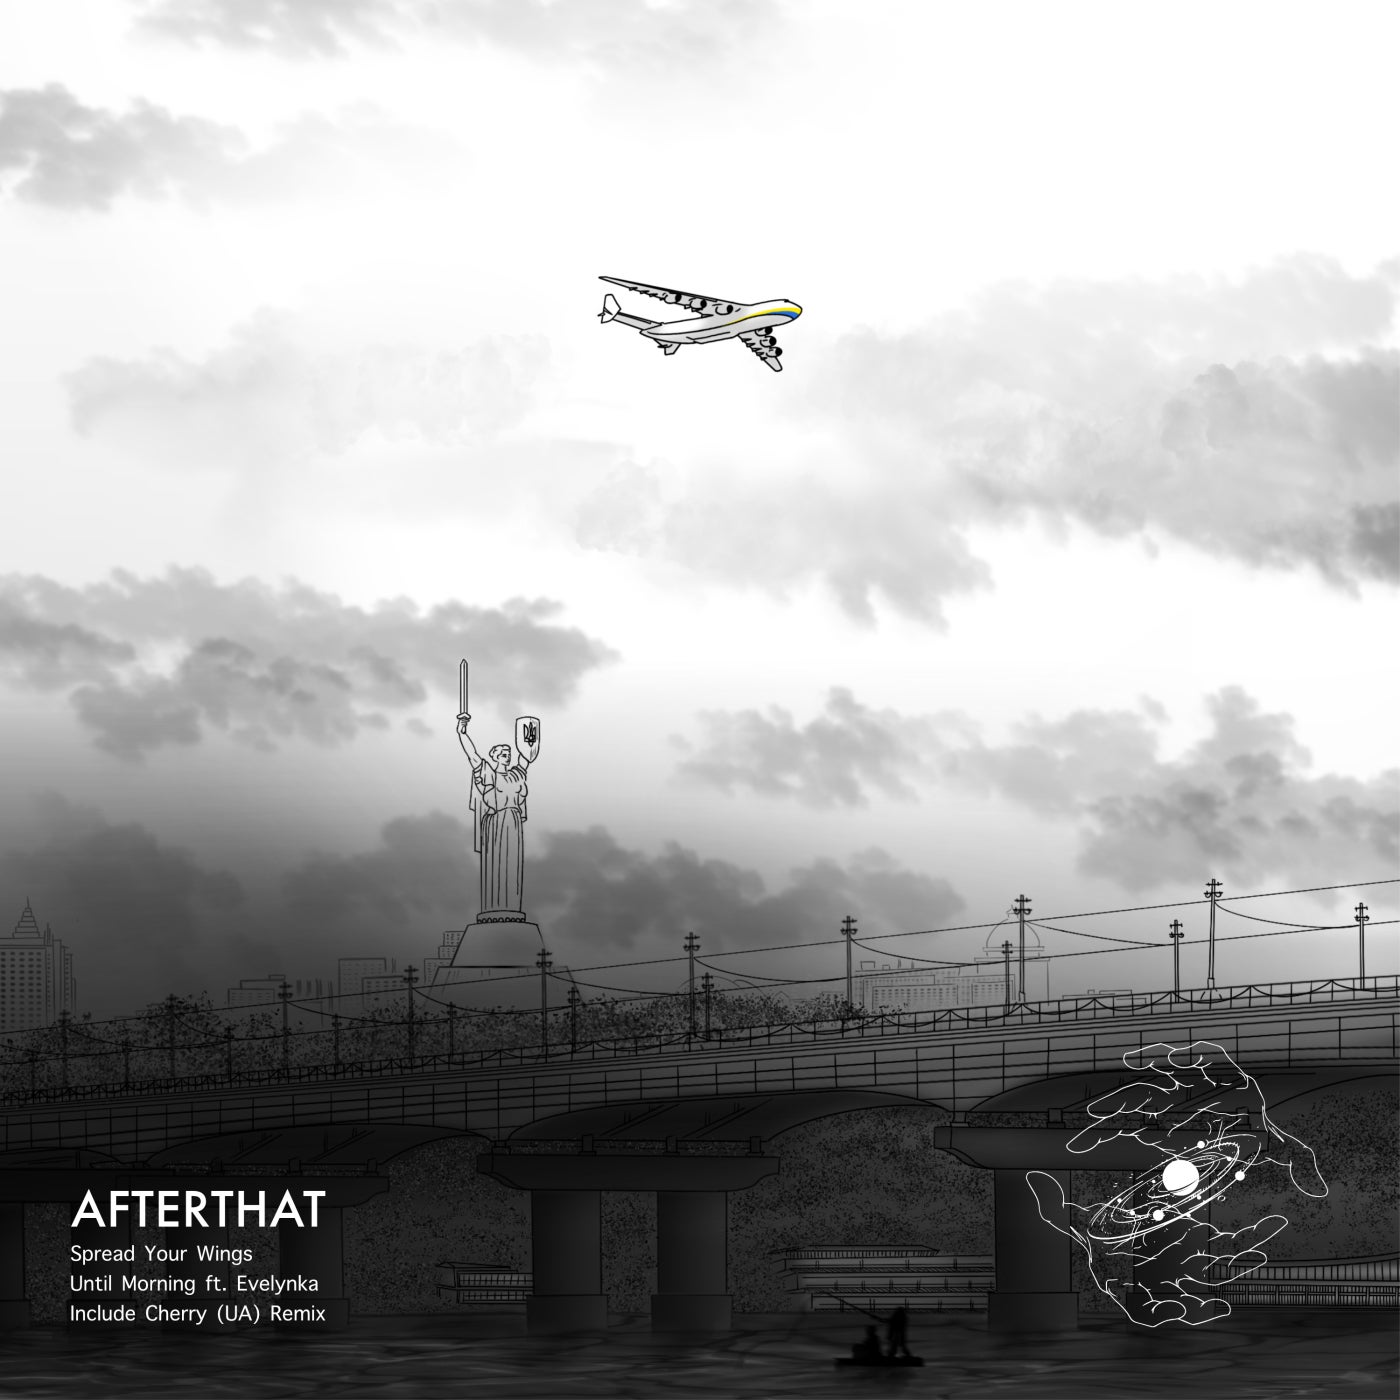 Evelynka, Afterthat - Until Morning (Cherry (UA) Extended Remix)